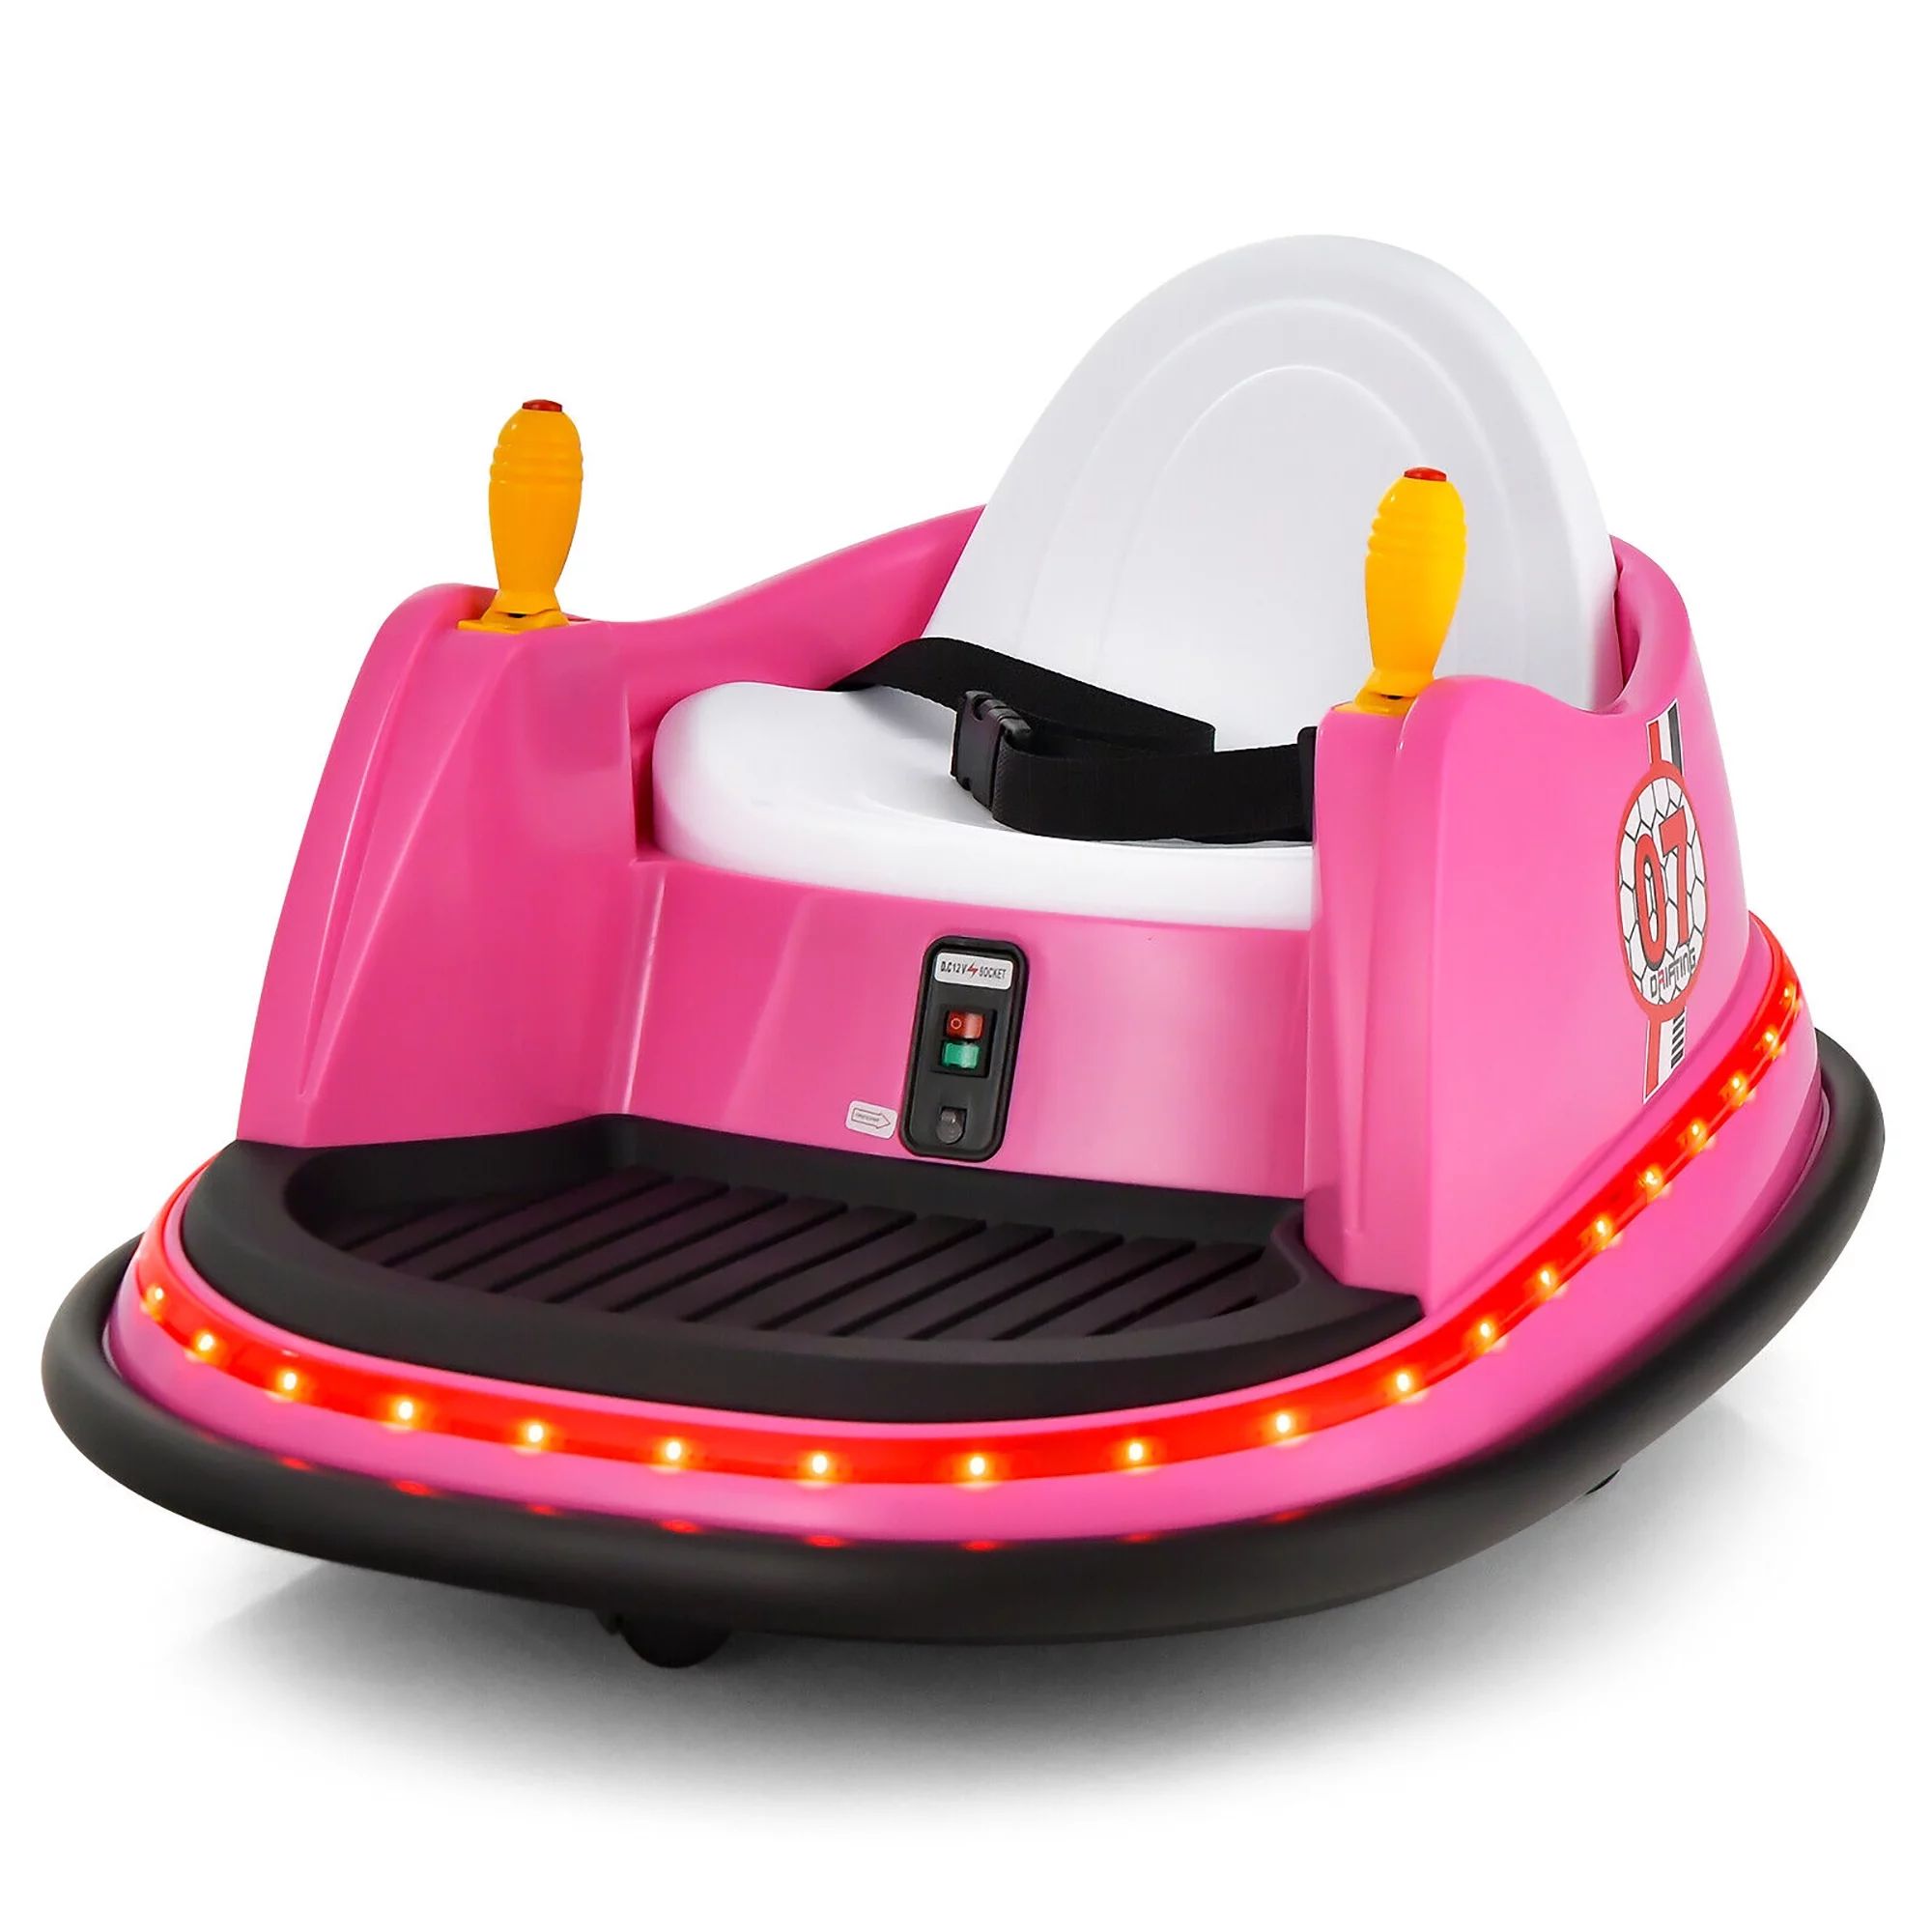 Gymax 12V Vehicle 360 Degree Spin Race Toy Kids Ride On Bumper Car w/ Remote Control Pink - Walma... | Walmart (US)